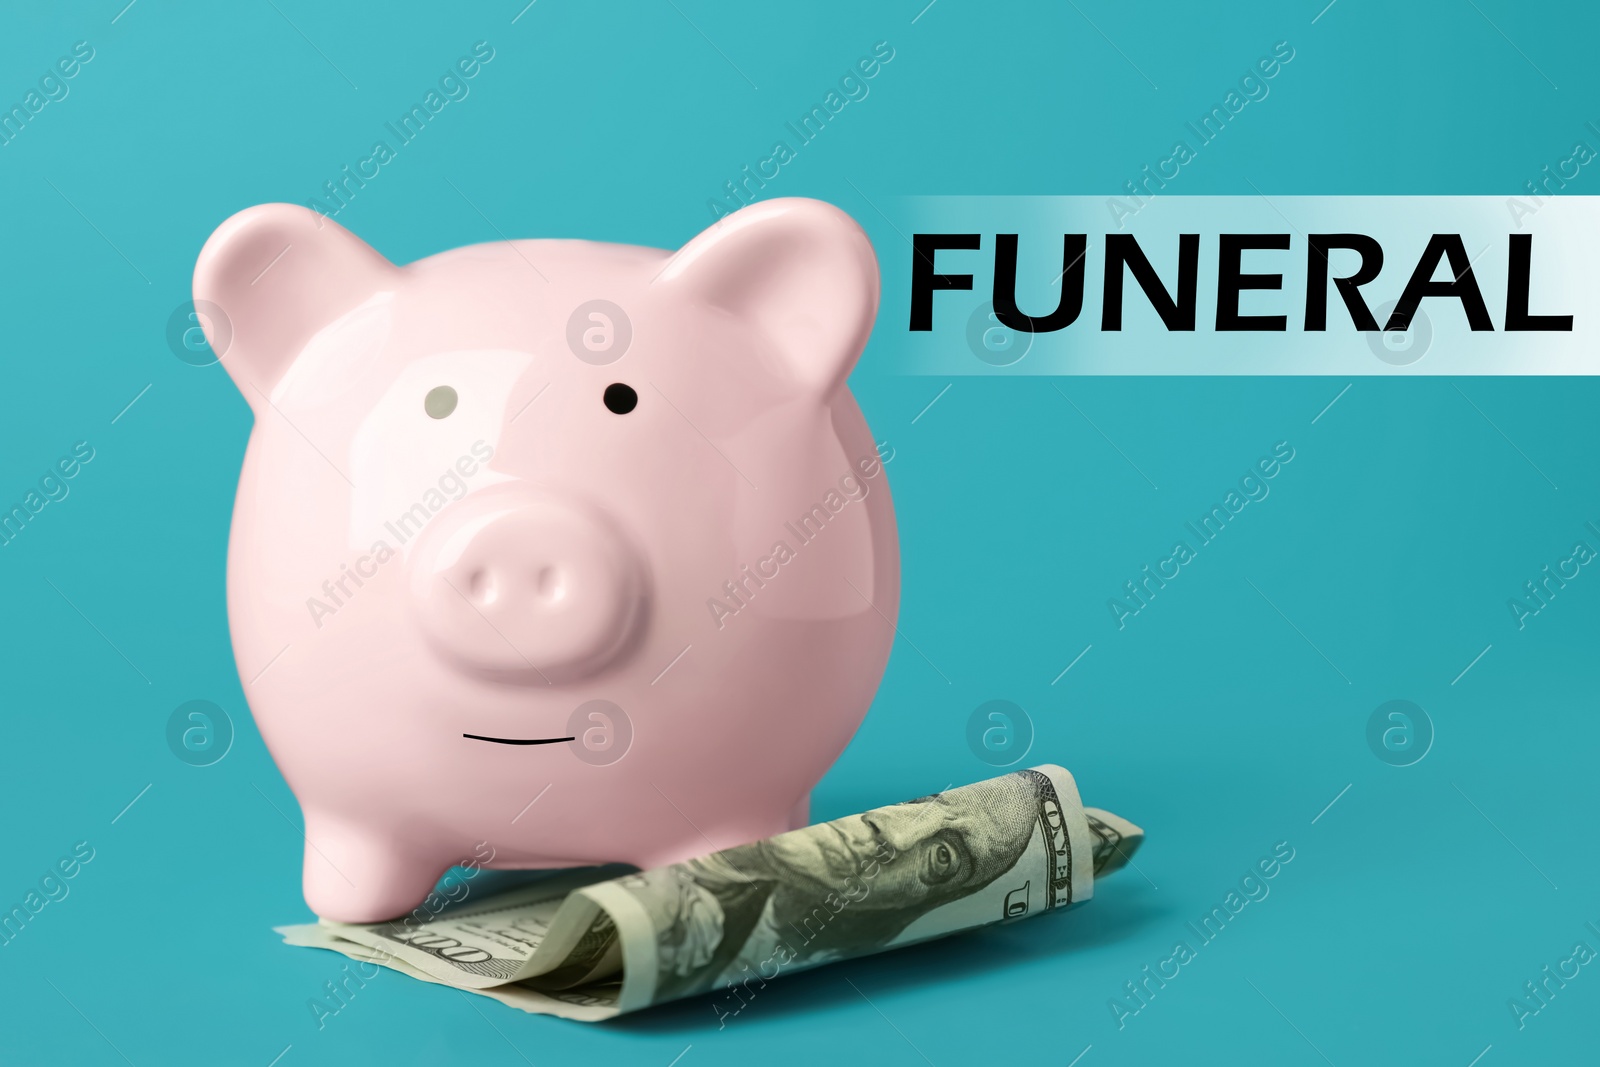 Image of Money for funeral expenses. Pink piggy bank and dollar banknotes on turquoise background